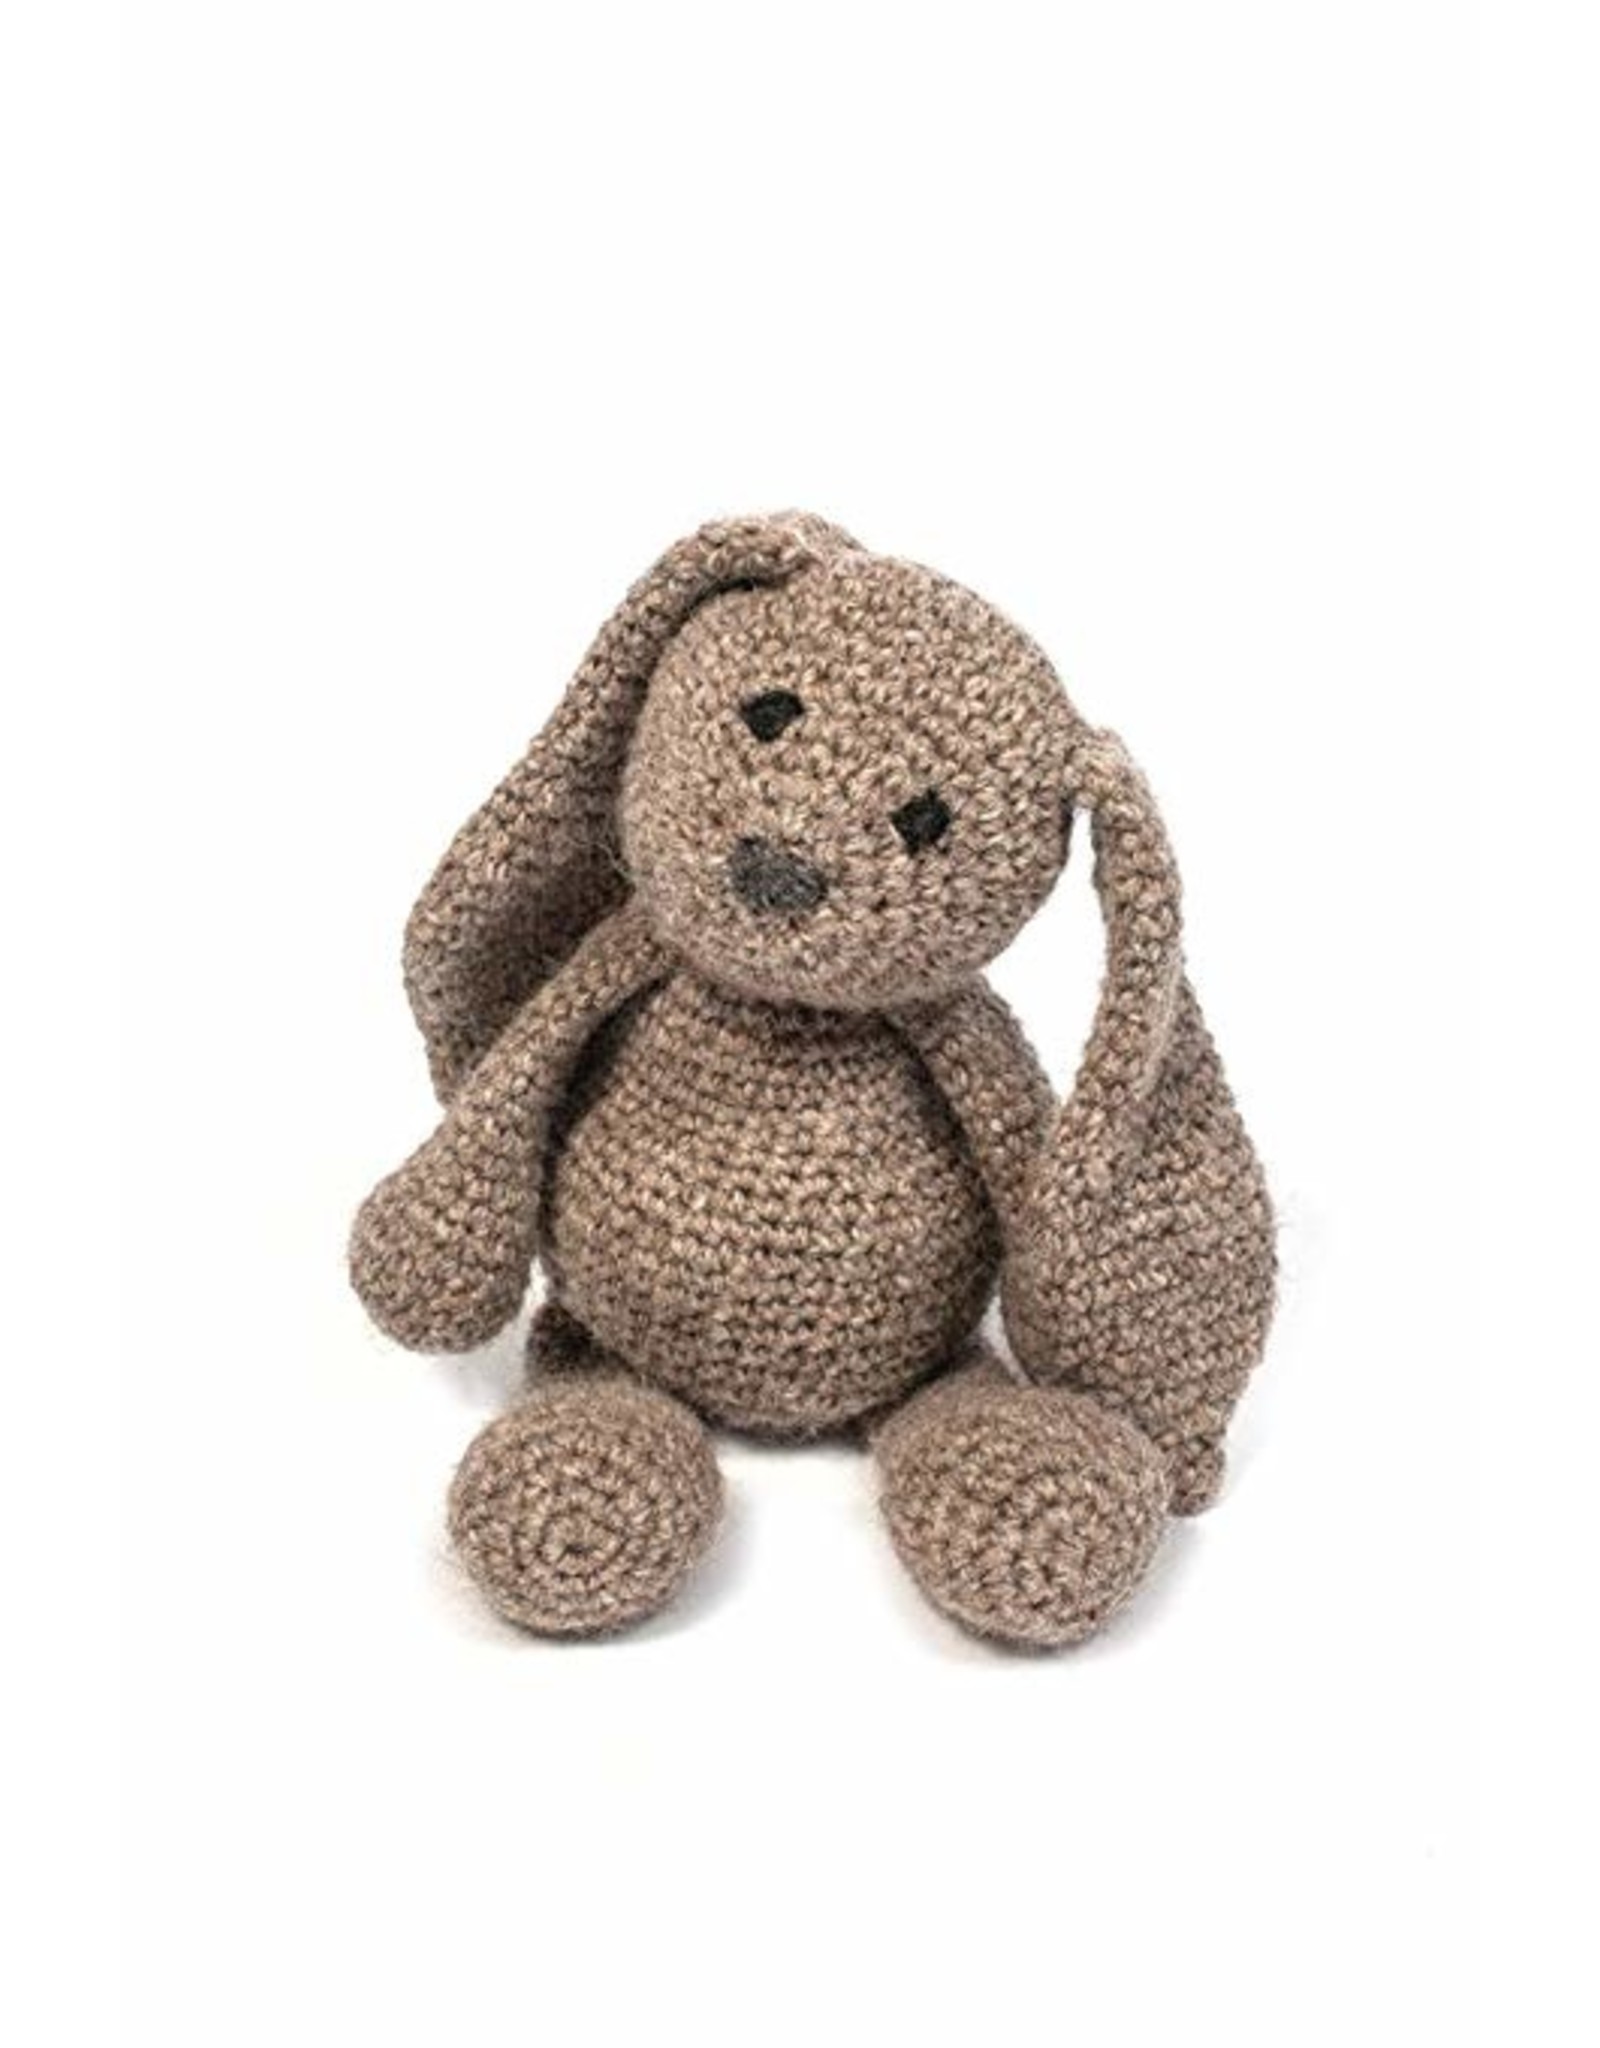 Amazing Crochet Animal Kits  Don t miss out 